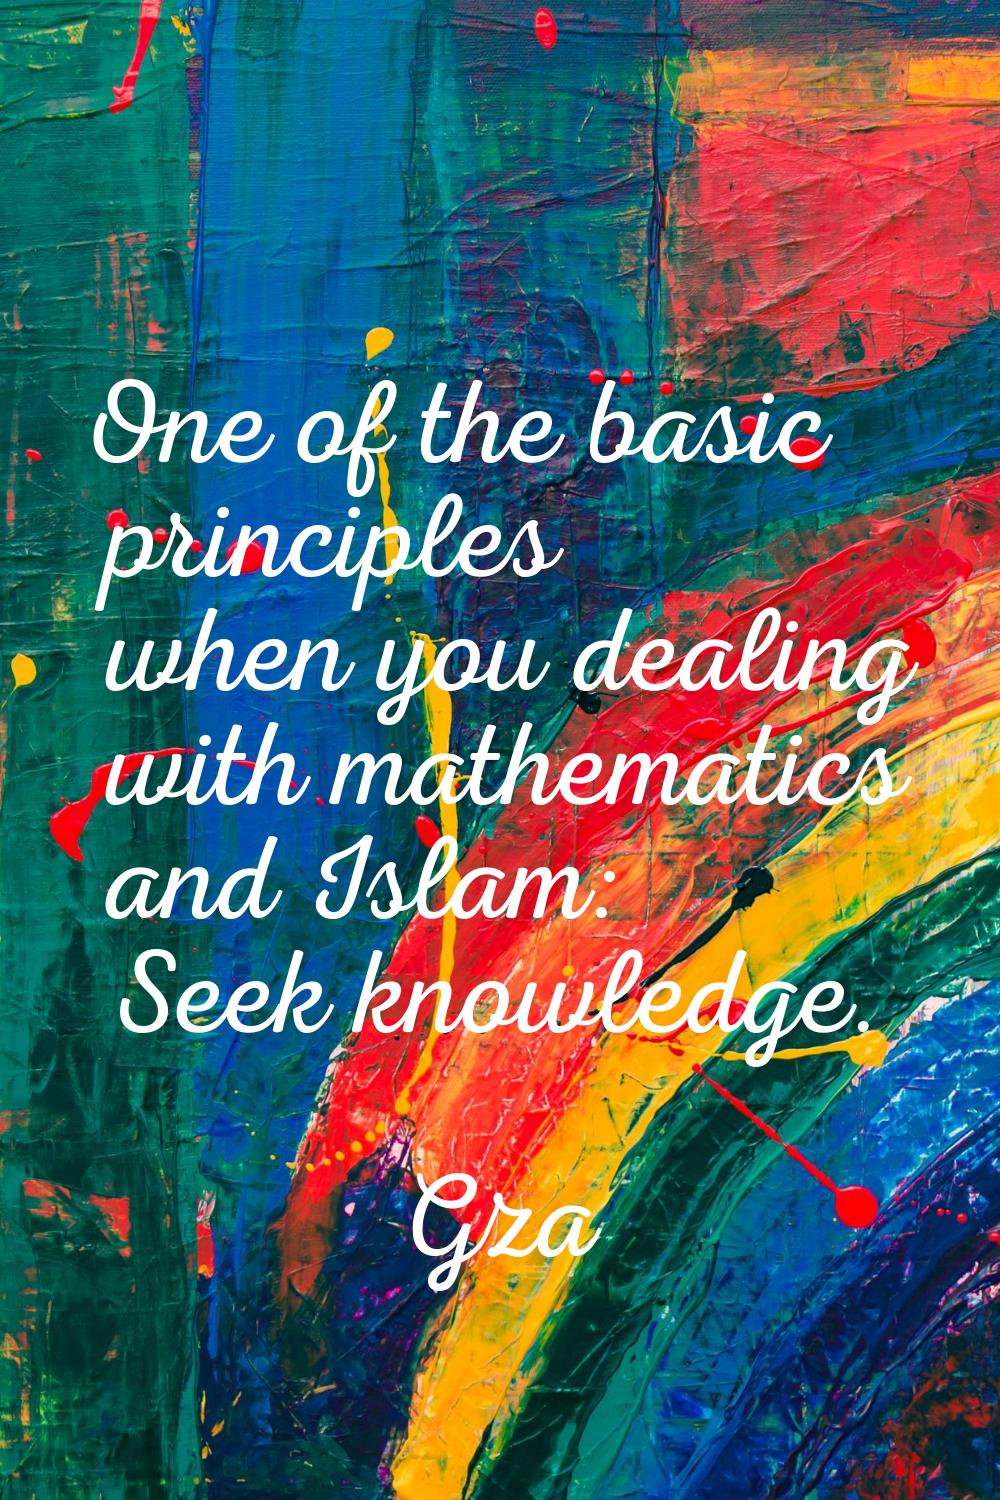 One of the basic principles when you dealing with mathematics and Islam: Seek knowledge.